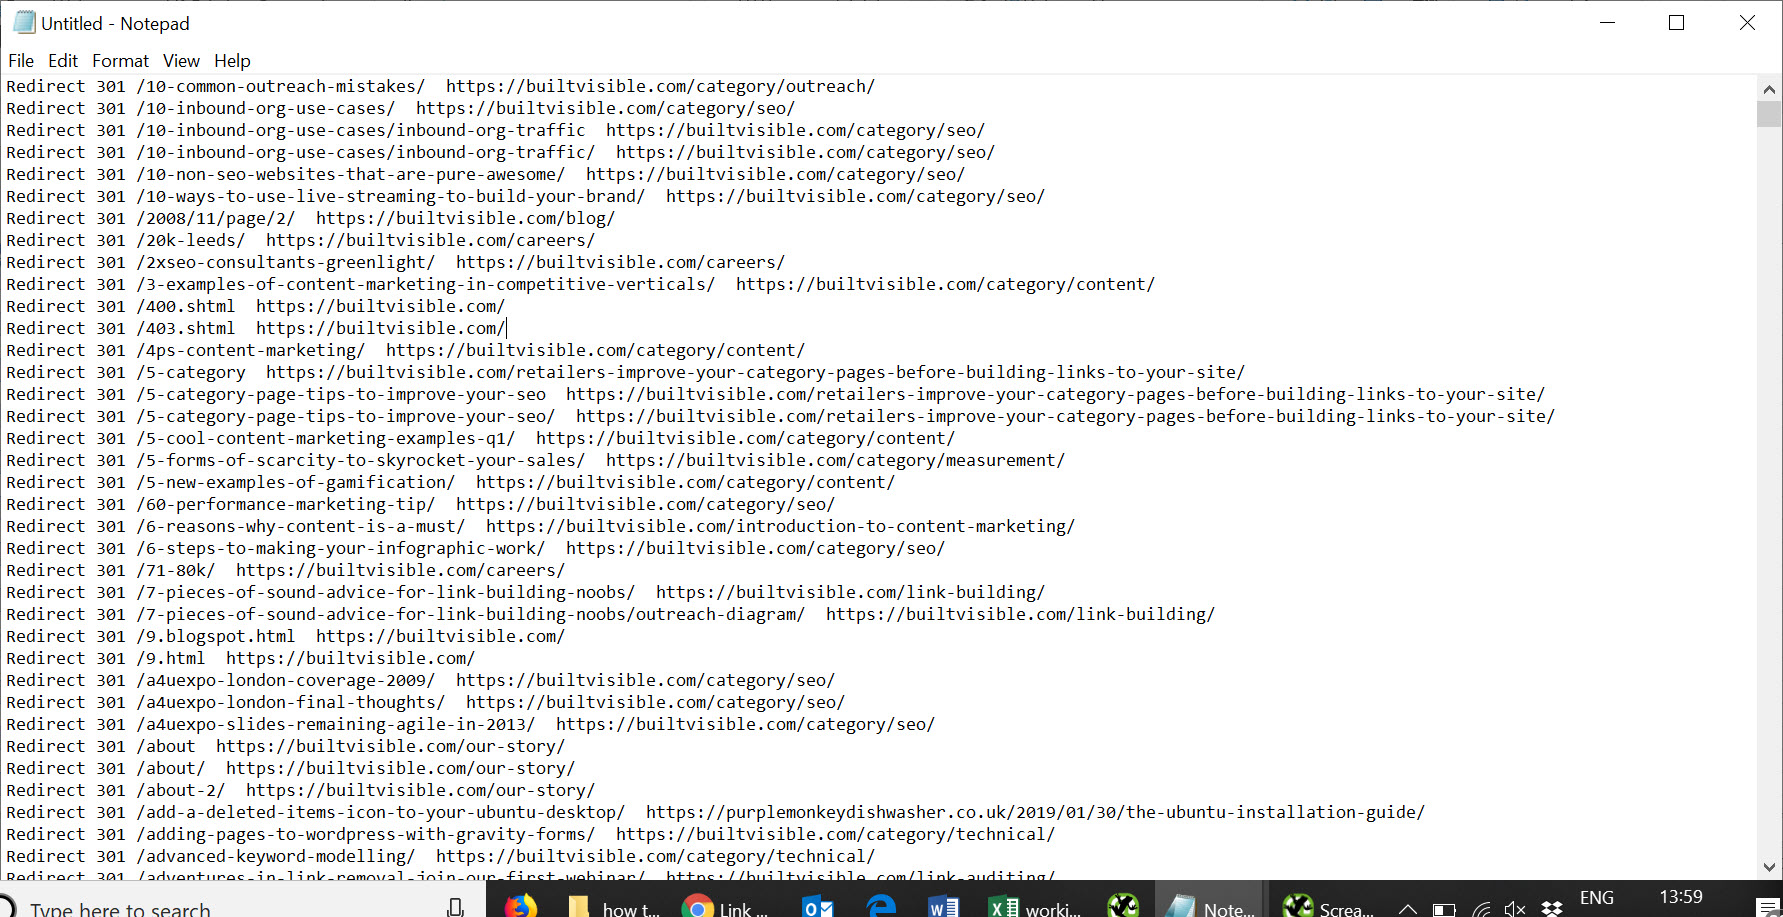 my completed robots.txt file